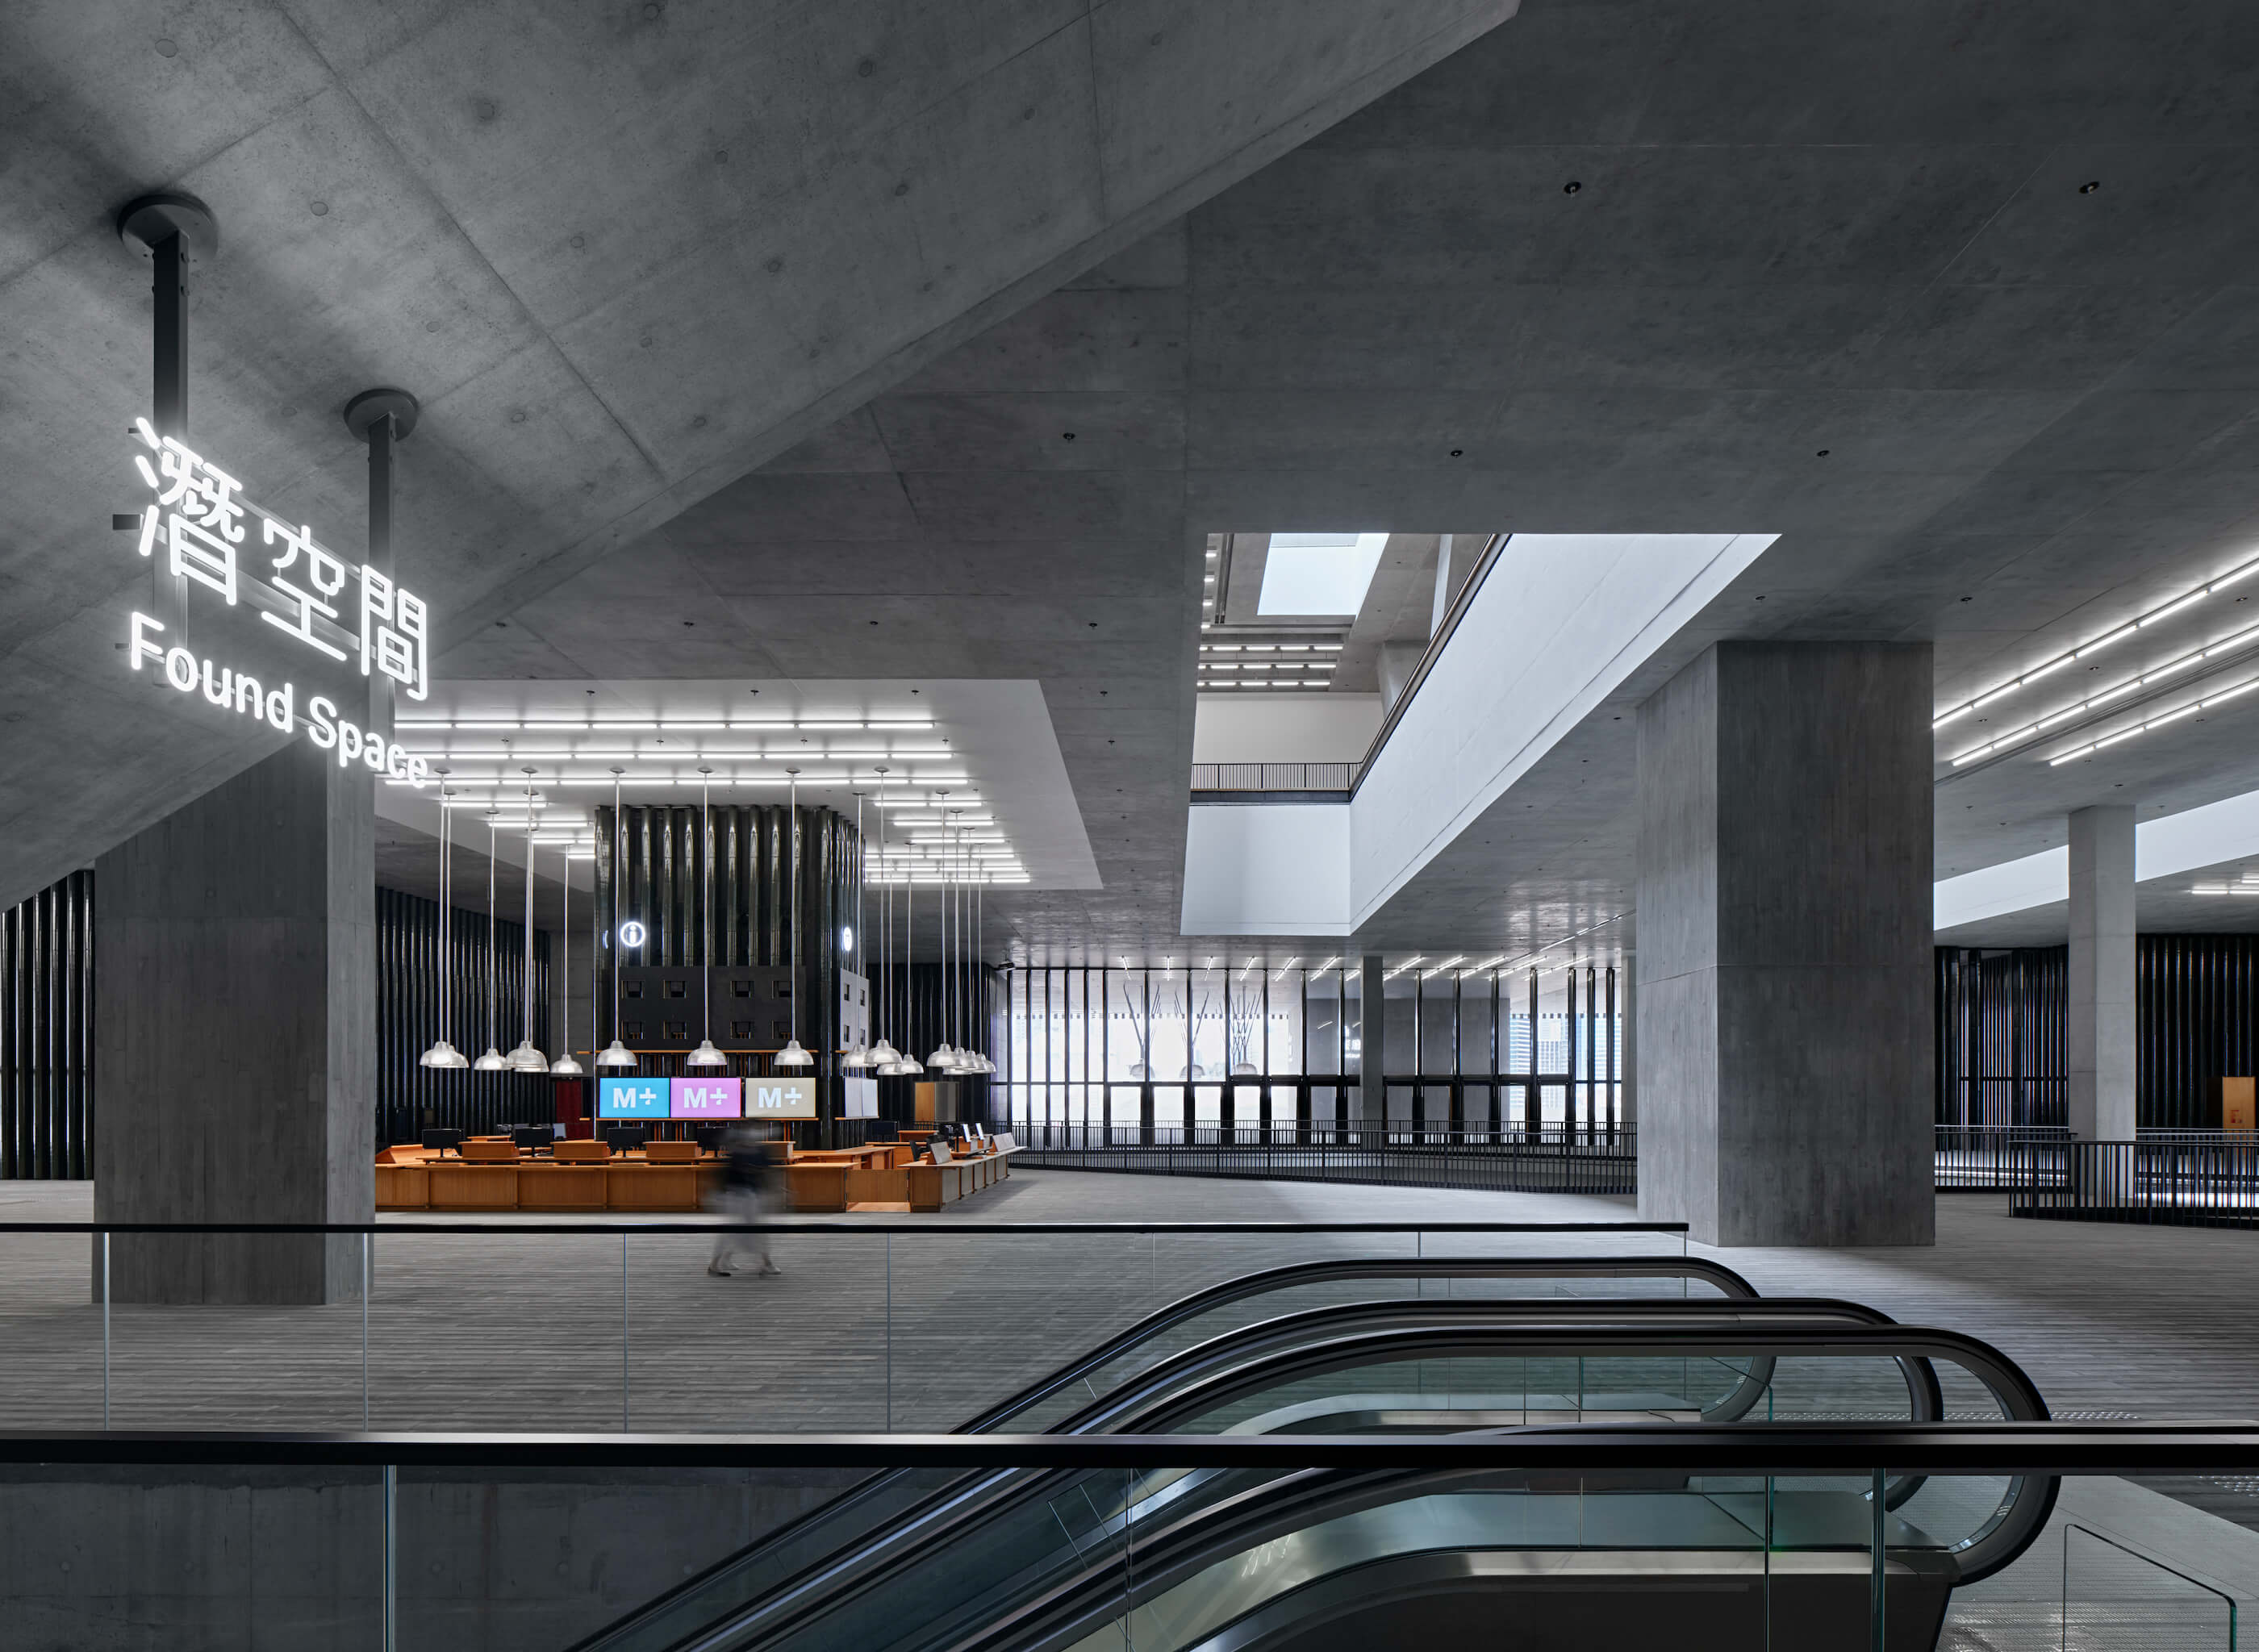 A main entrance hall at a contemporary art museum, M+